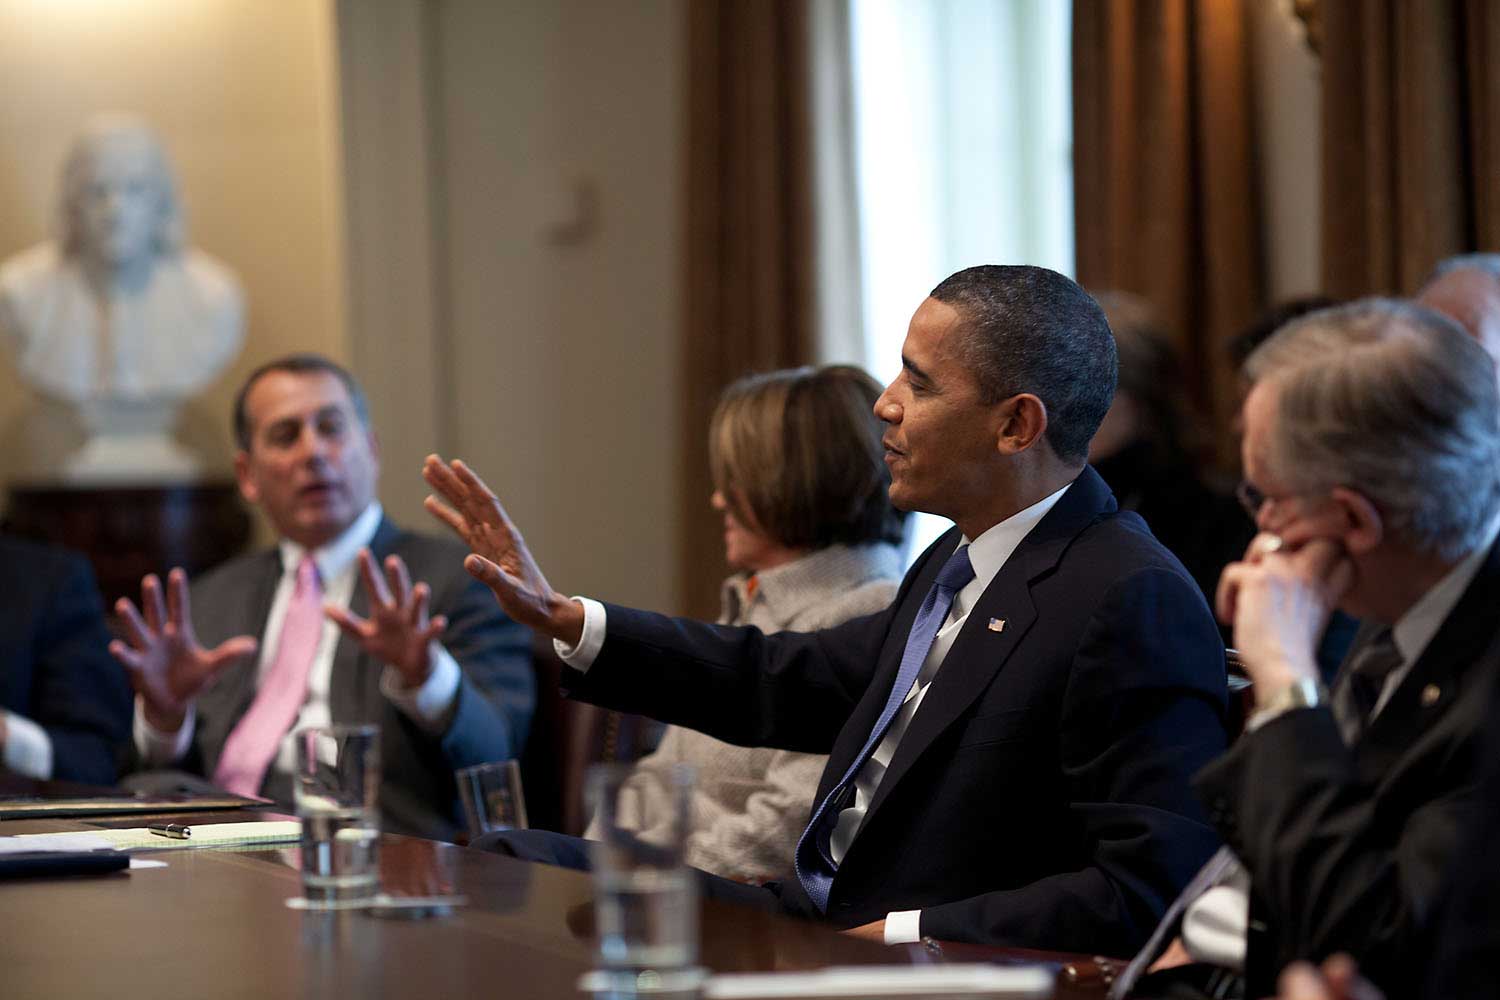 President Barack Obama engages with Rep. John Boehner, soon-to-be Speaker of the House, during a spirited bipartisan Congressional leadership meeting in the Cabinet Room of the White House, Feb. 9, 2010.